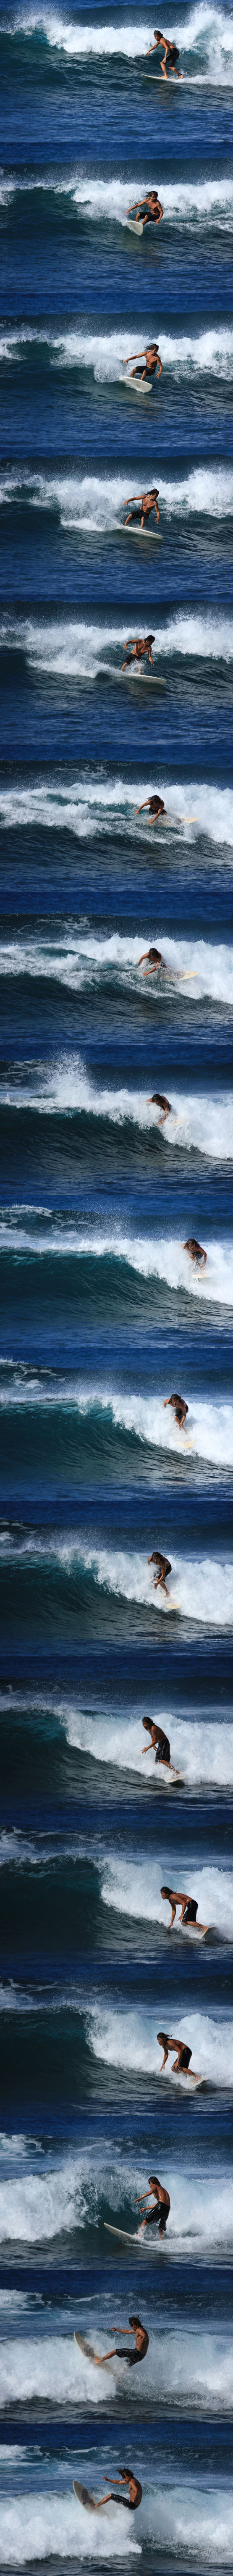 2010_NH_Surfing_SQ_T9815